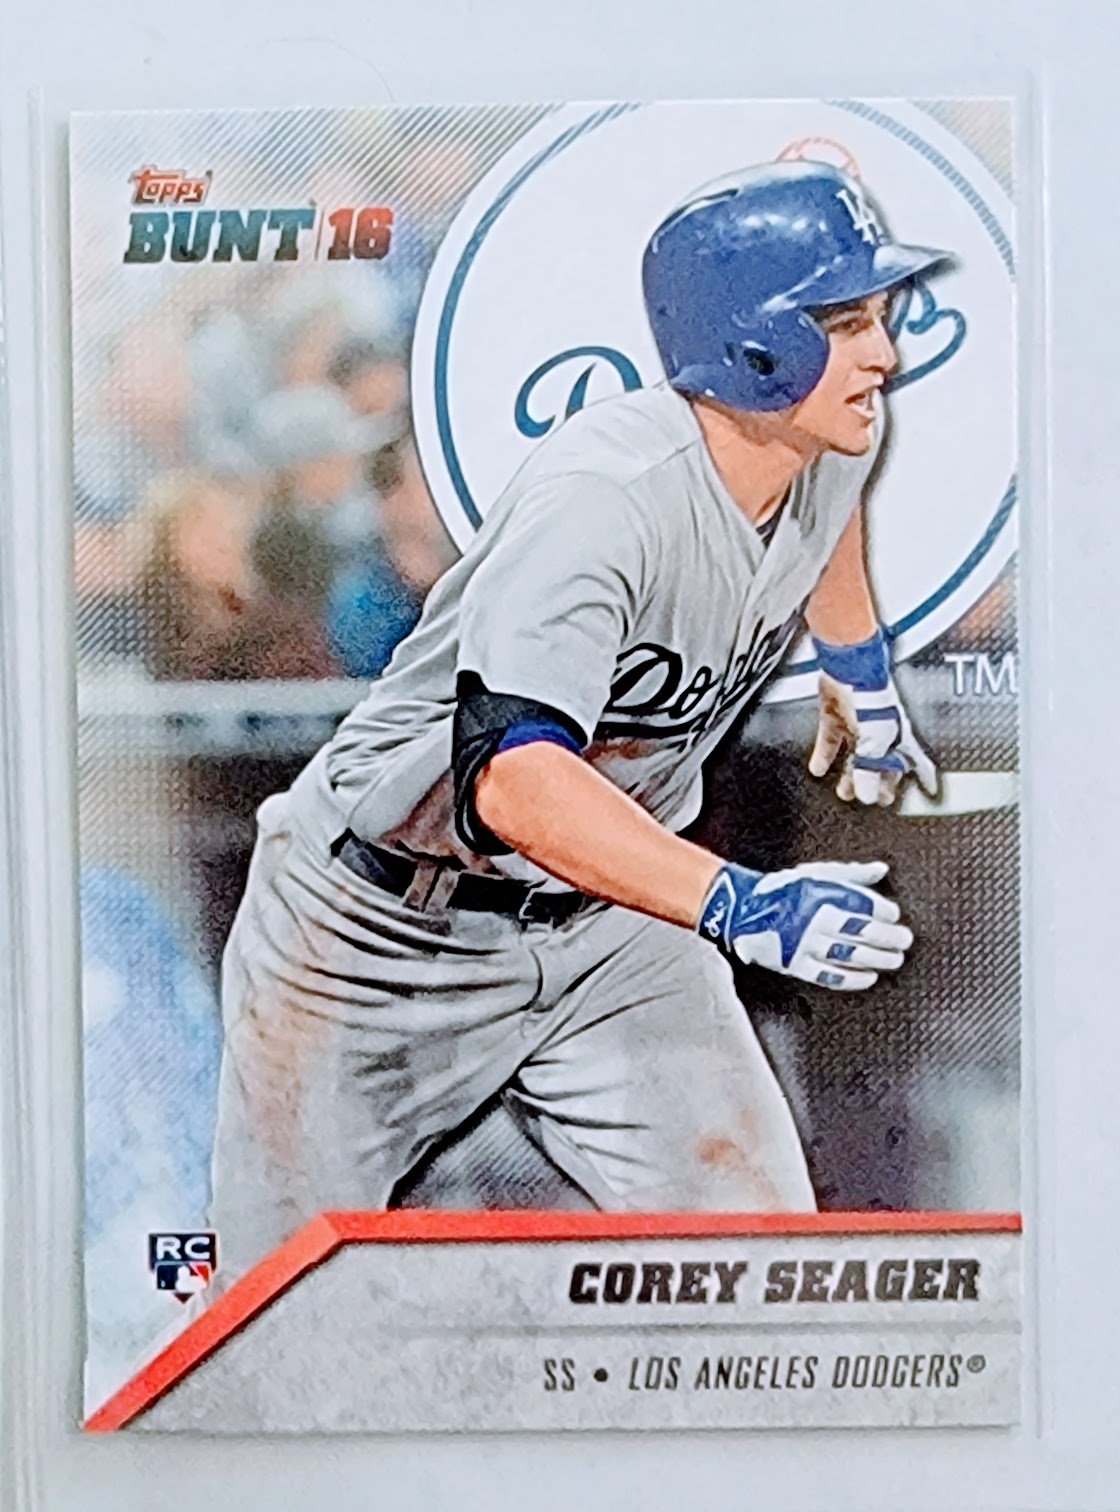 2016 Topps Bunt Corey Seager Rookie Baseball Card TPTV simple Xclusive Collectibles   